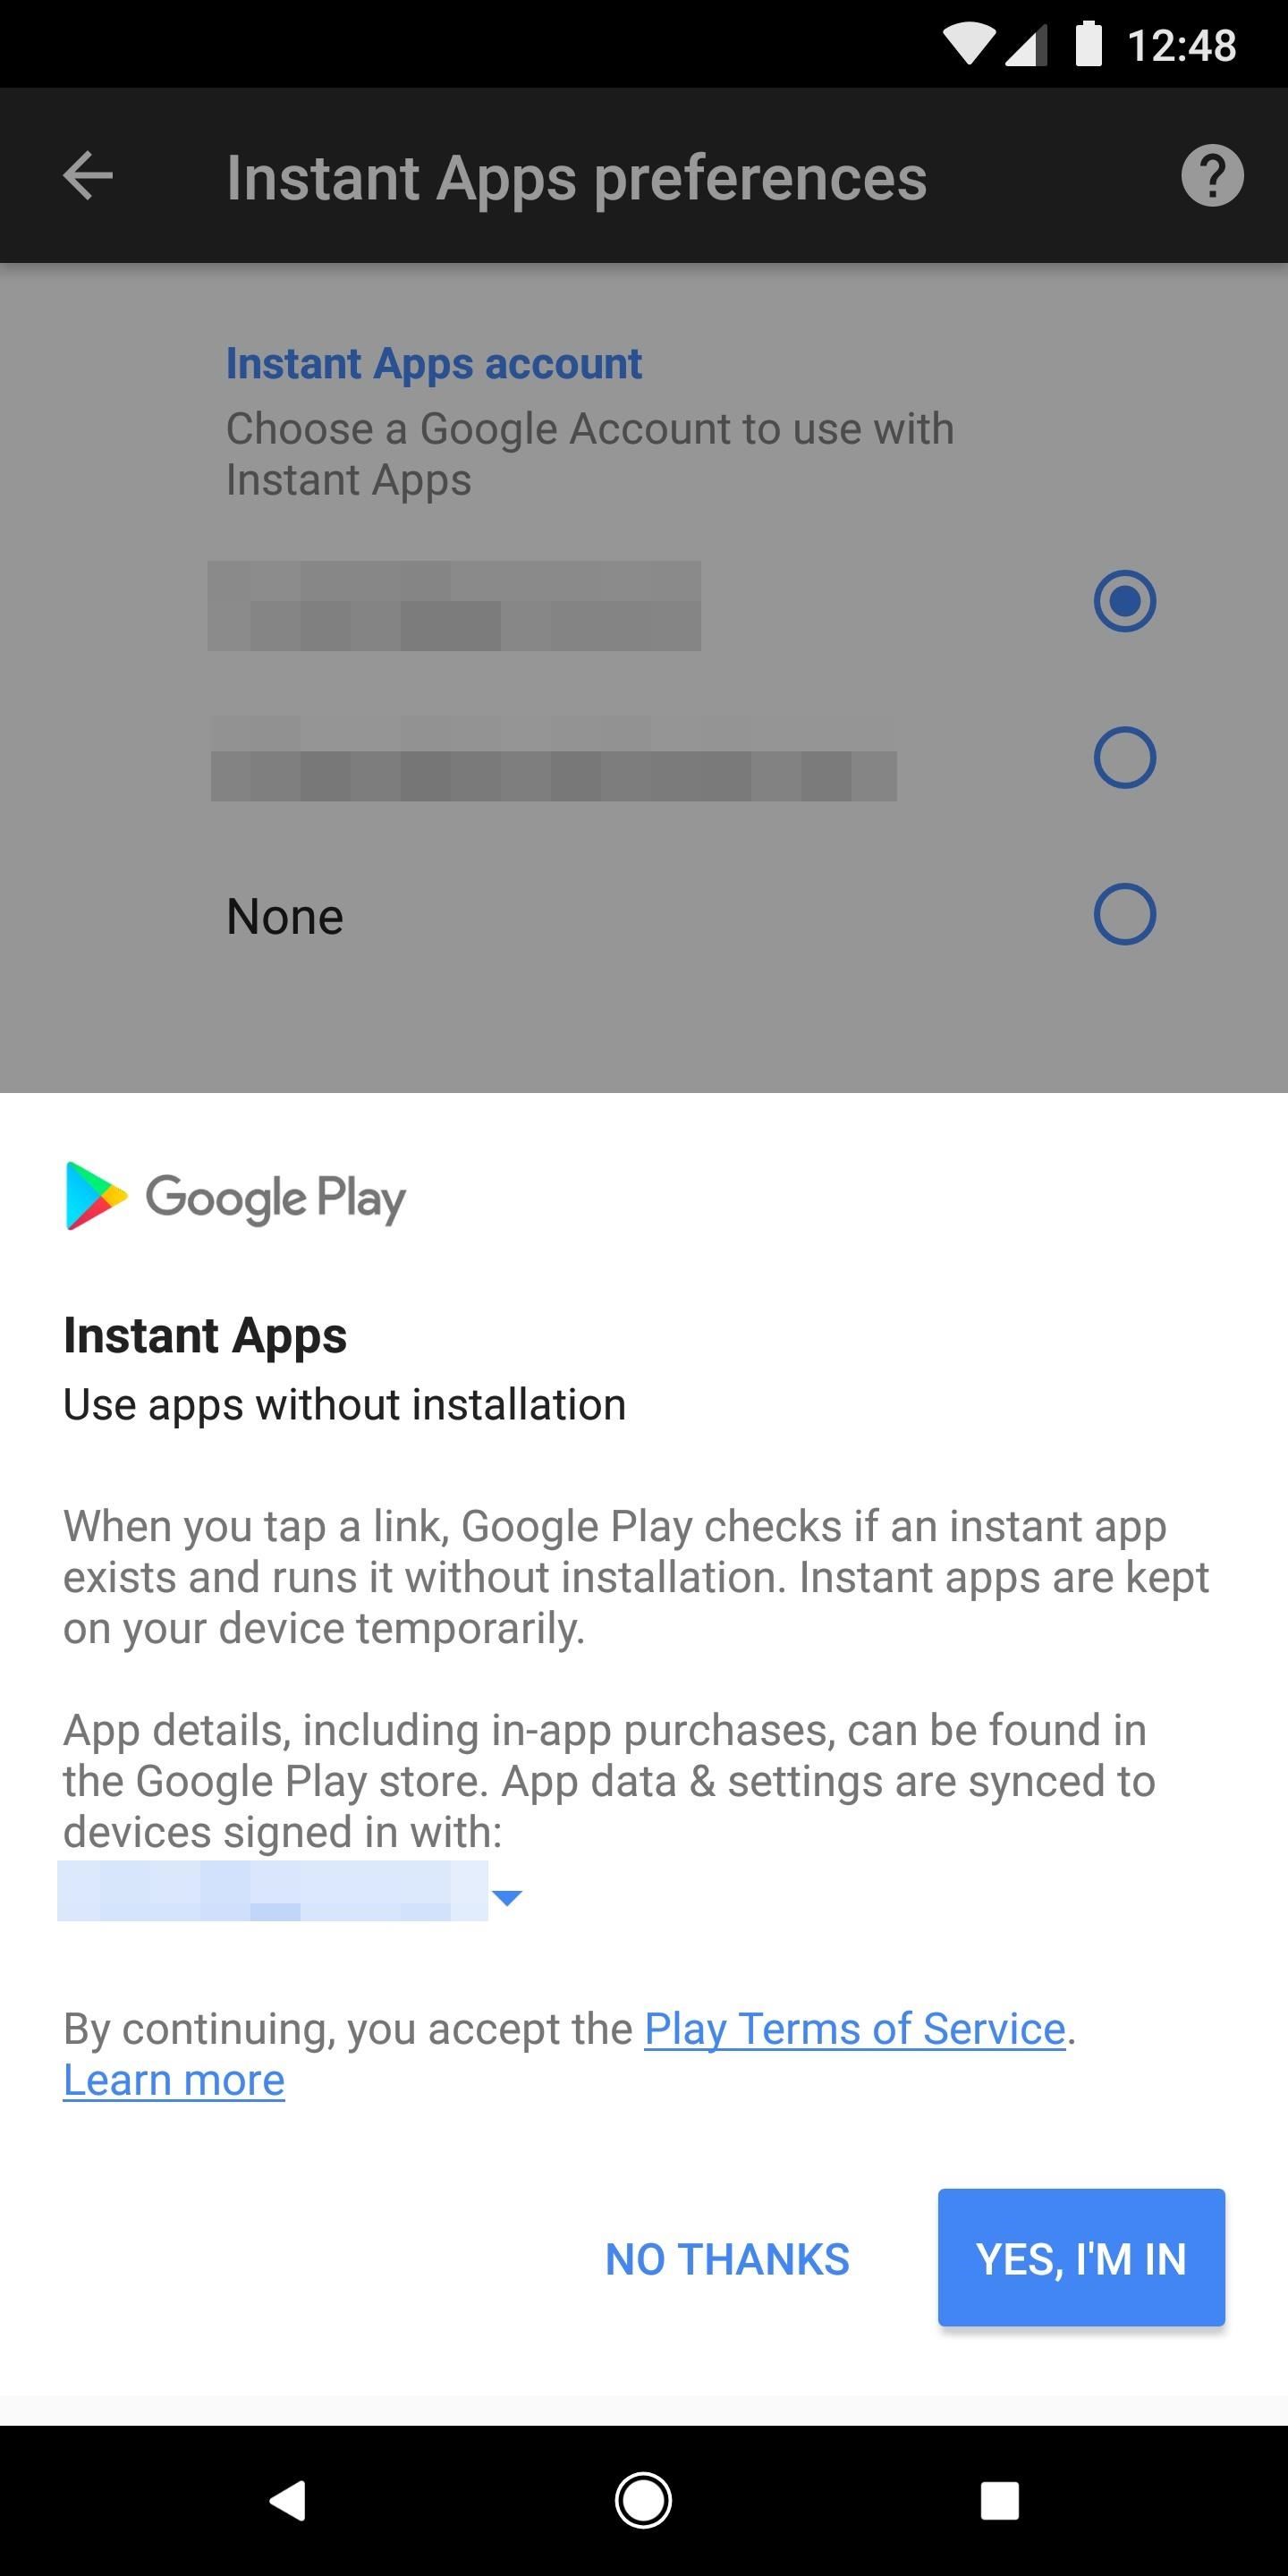 How to Use Instant Apps on Android